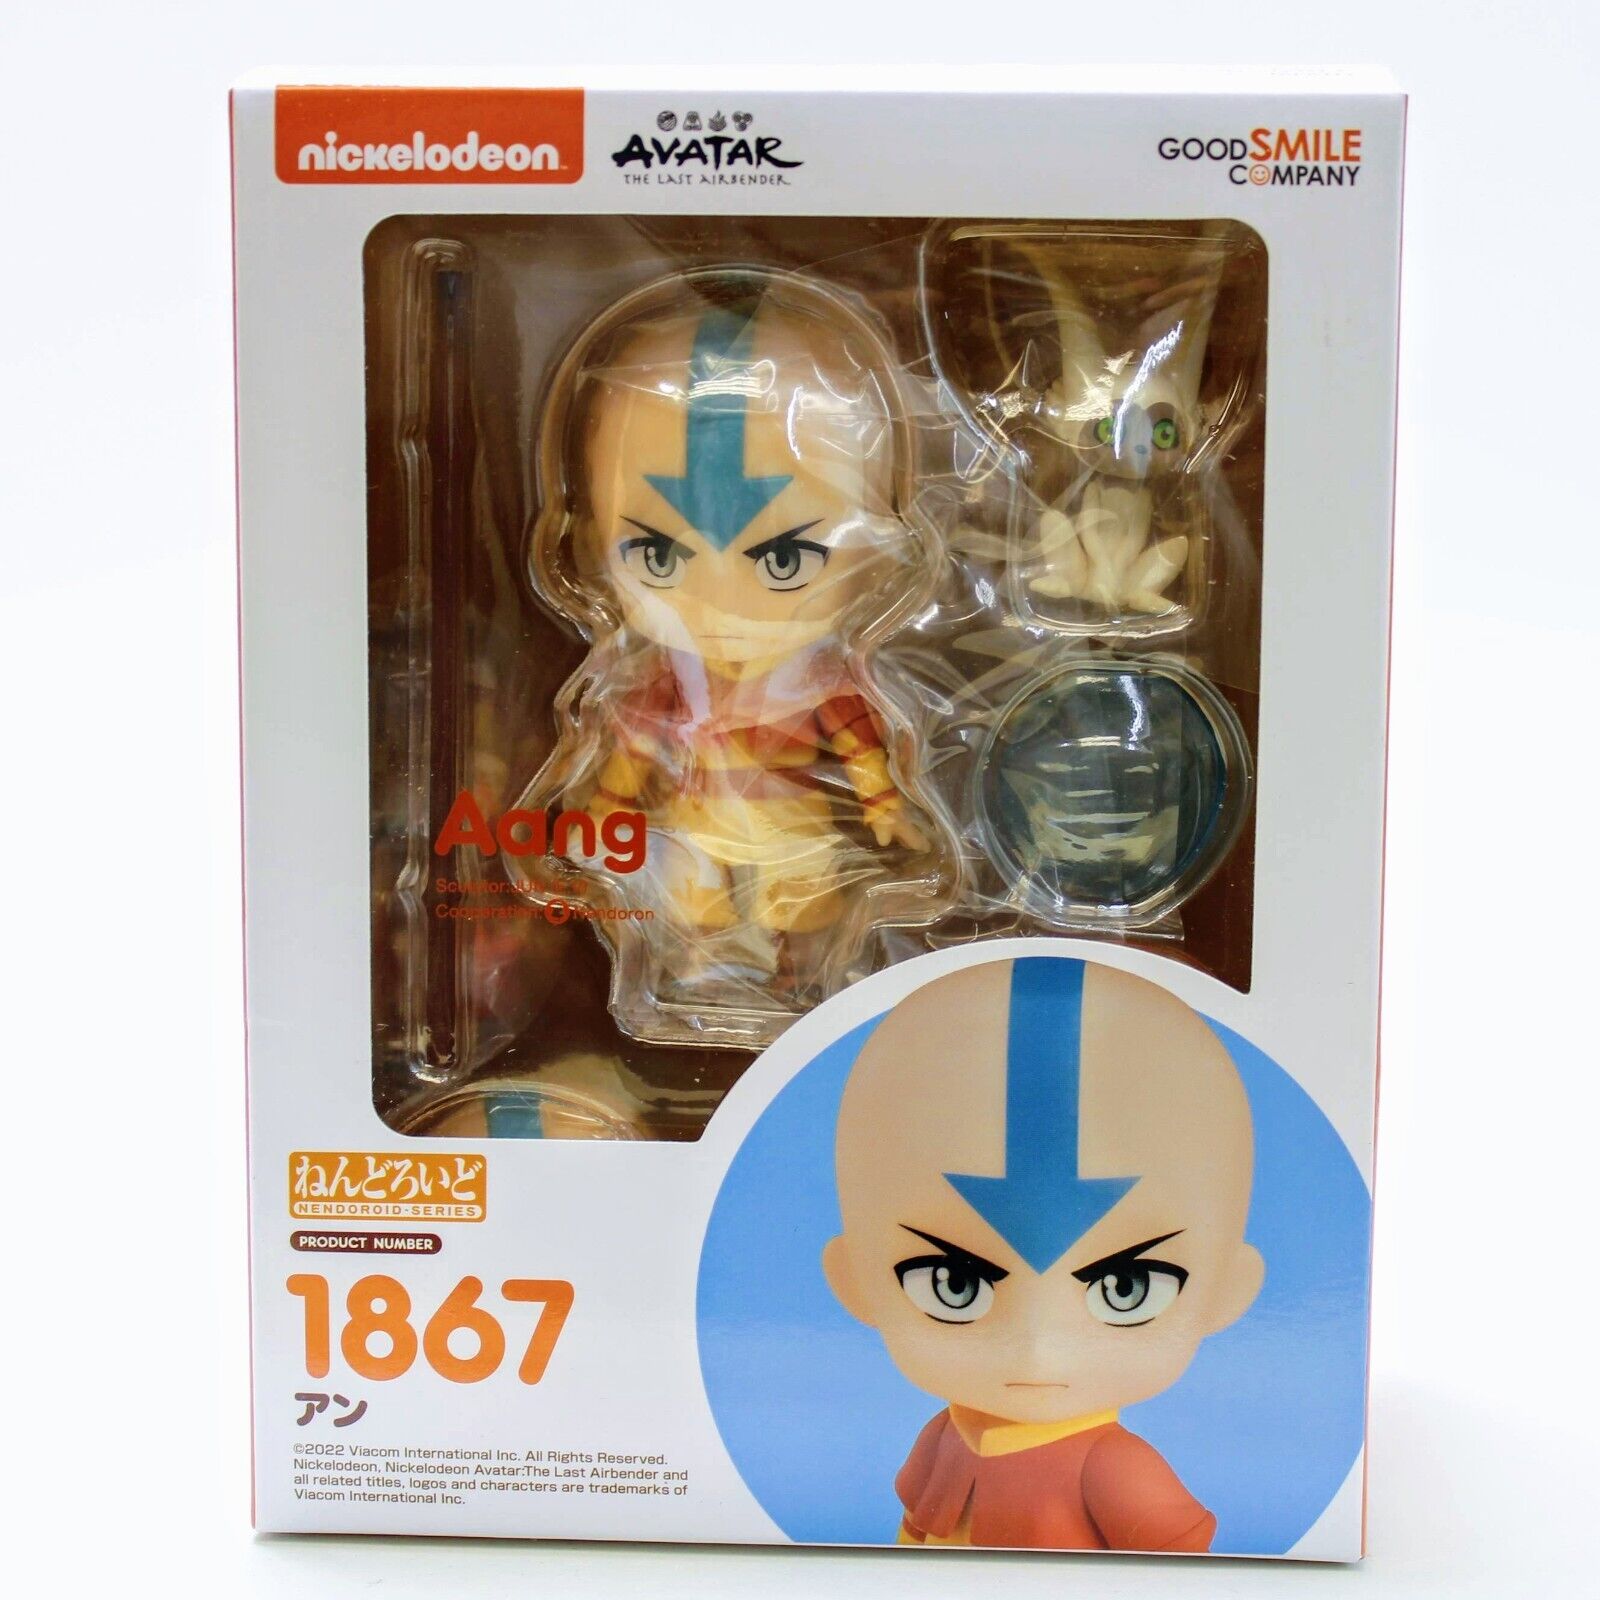 Nendoroid Avatar: The Last Airbender - Aang with Momo Authentic Goodsmile #1867